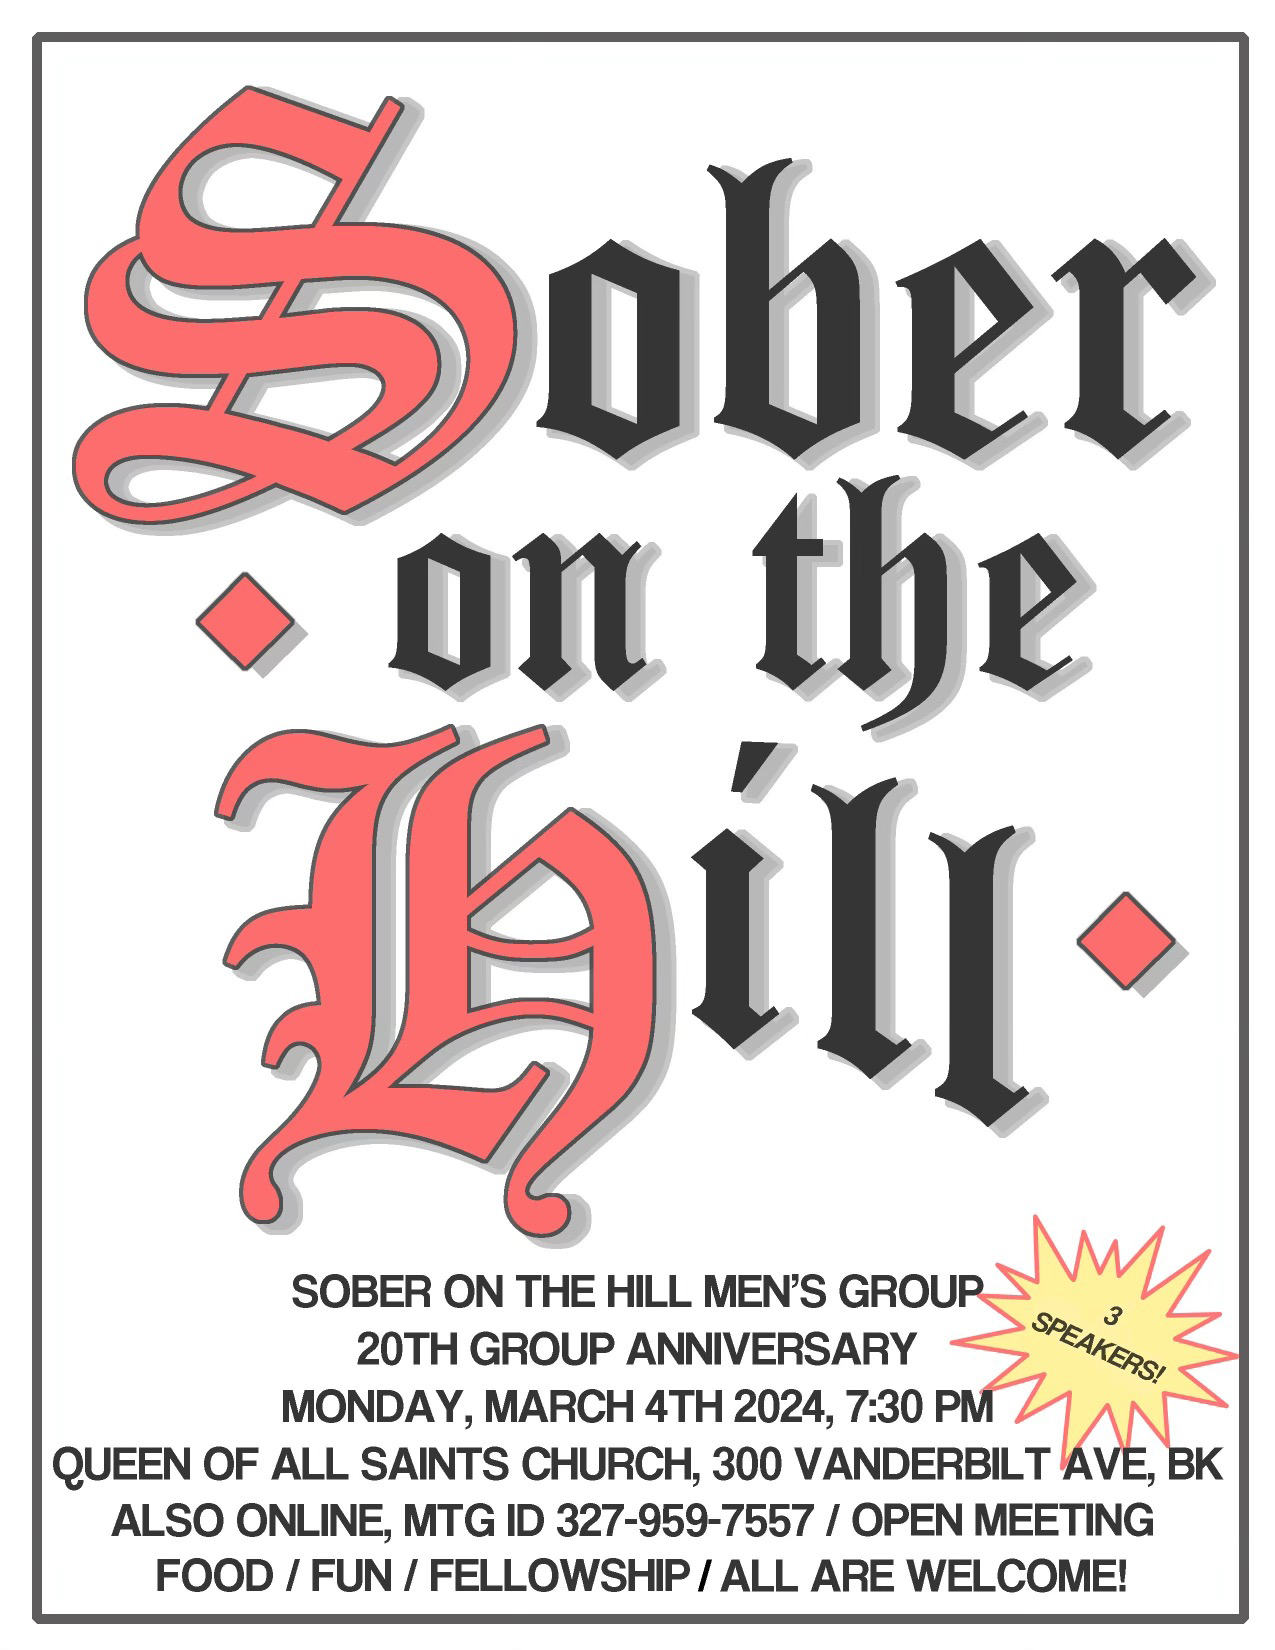 Sober On The Hill 20th Group Anniversary @ Queen of All Saints Church